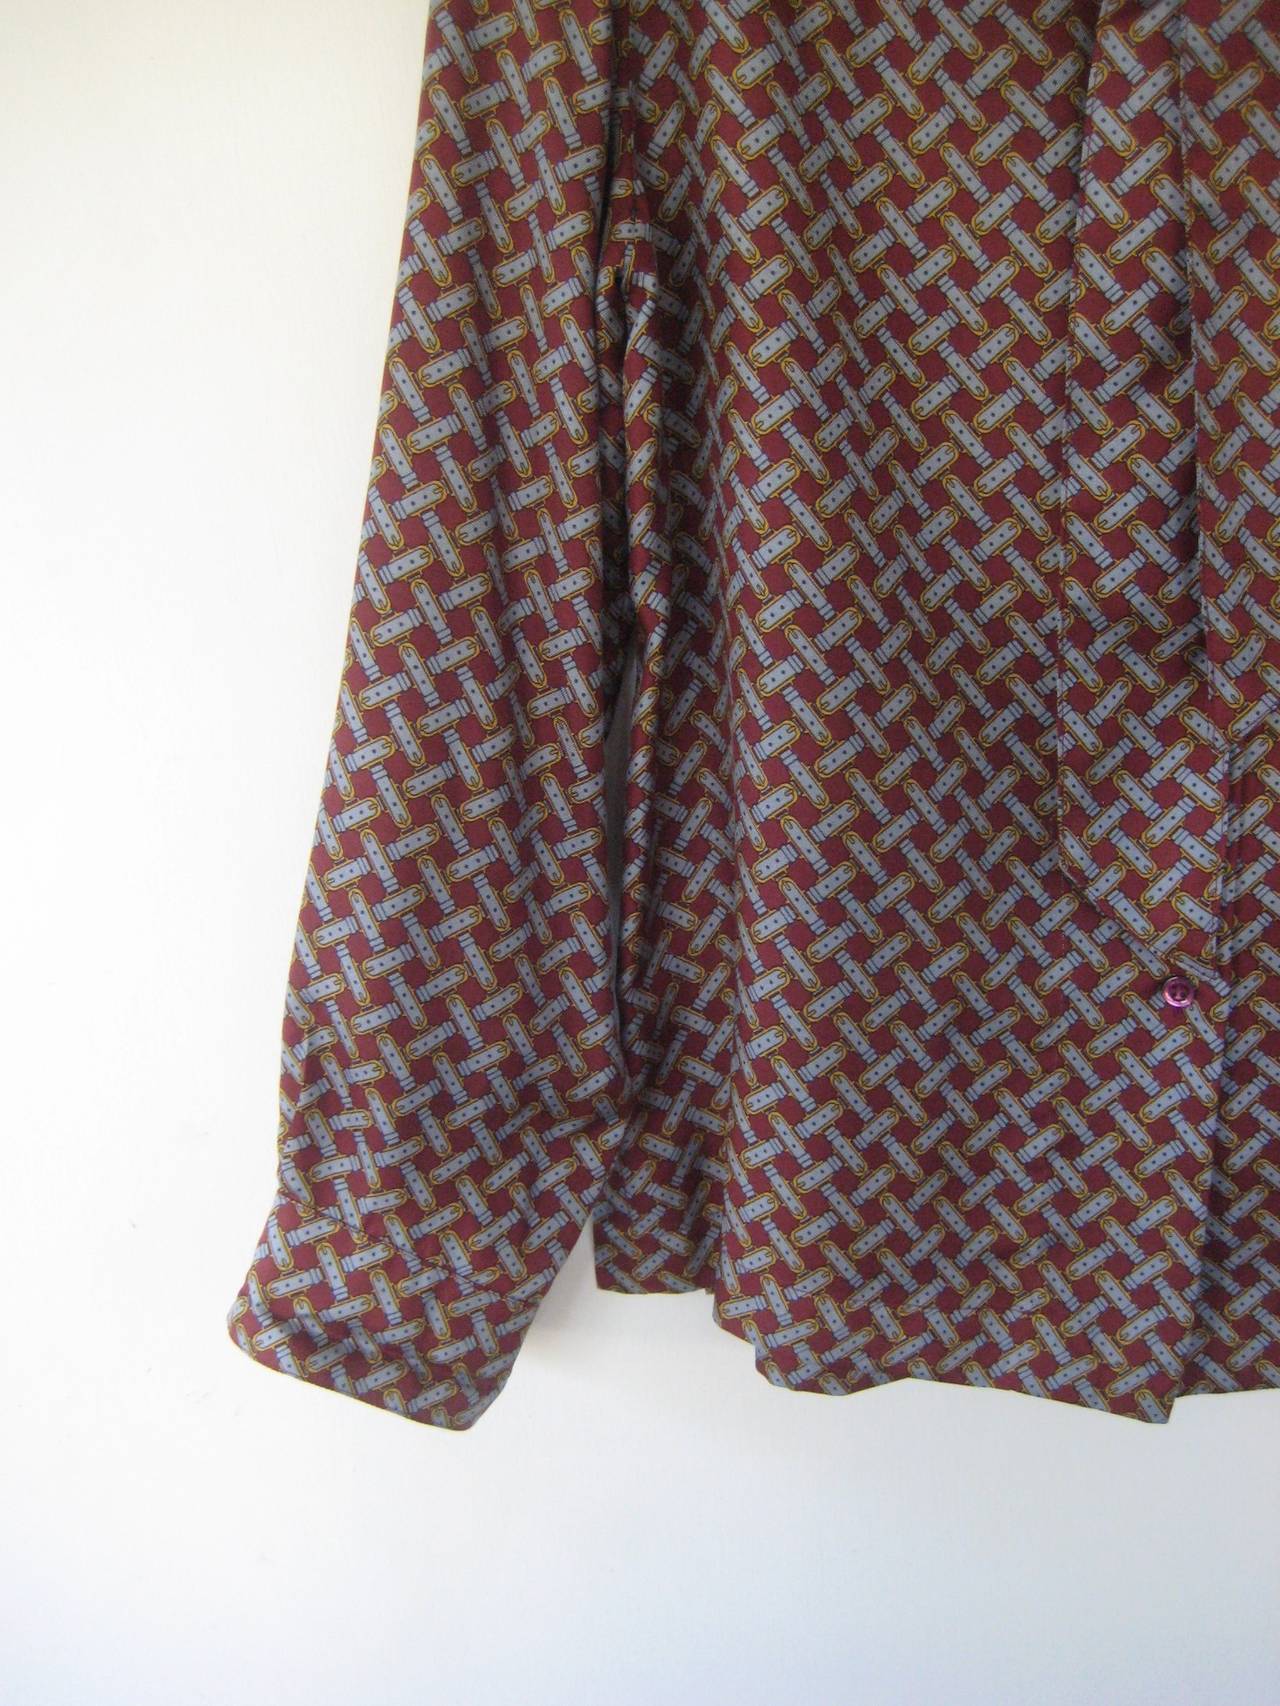 Fabulous  HERMES  silk print blouse
100% silk
Back yoke
Button down front
Buckle print with matching detachable necktie scarf.
Excellent condition.
Labeled size 36